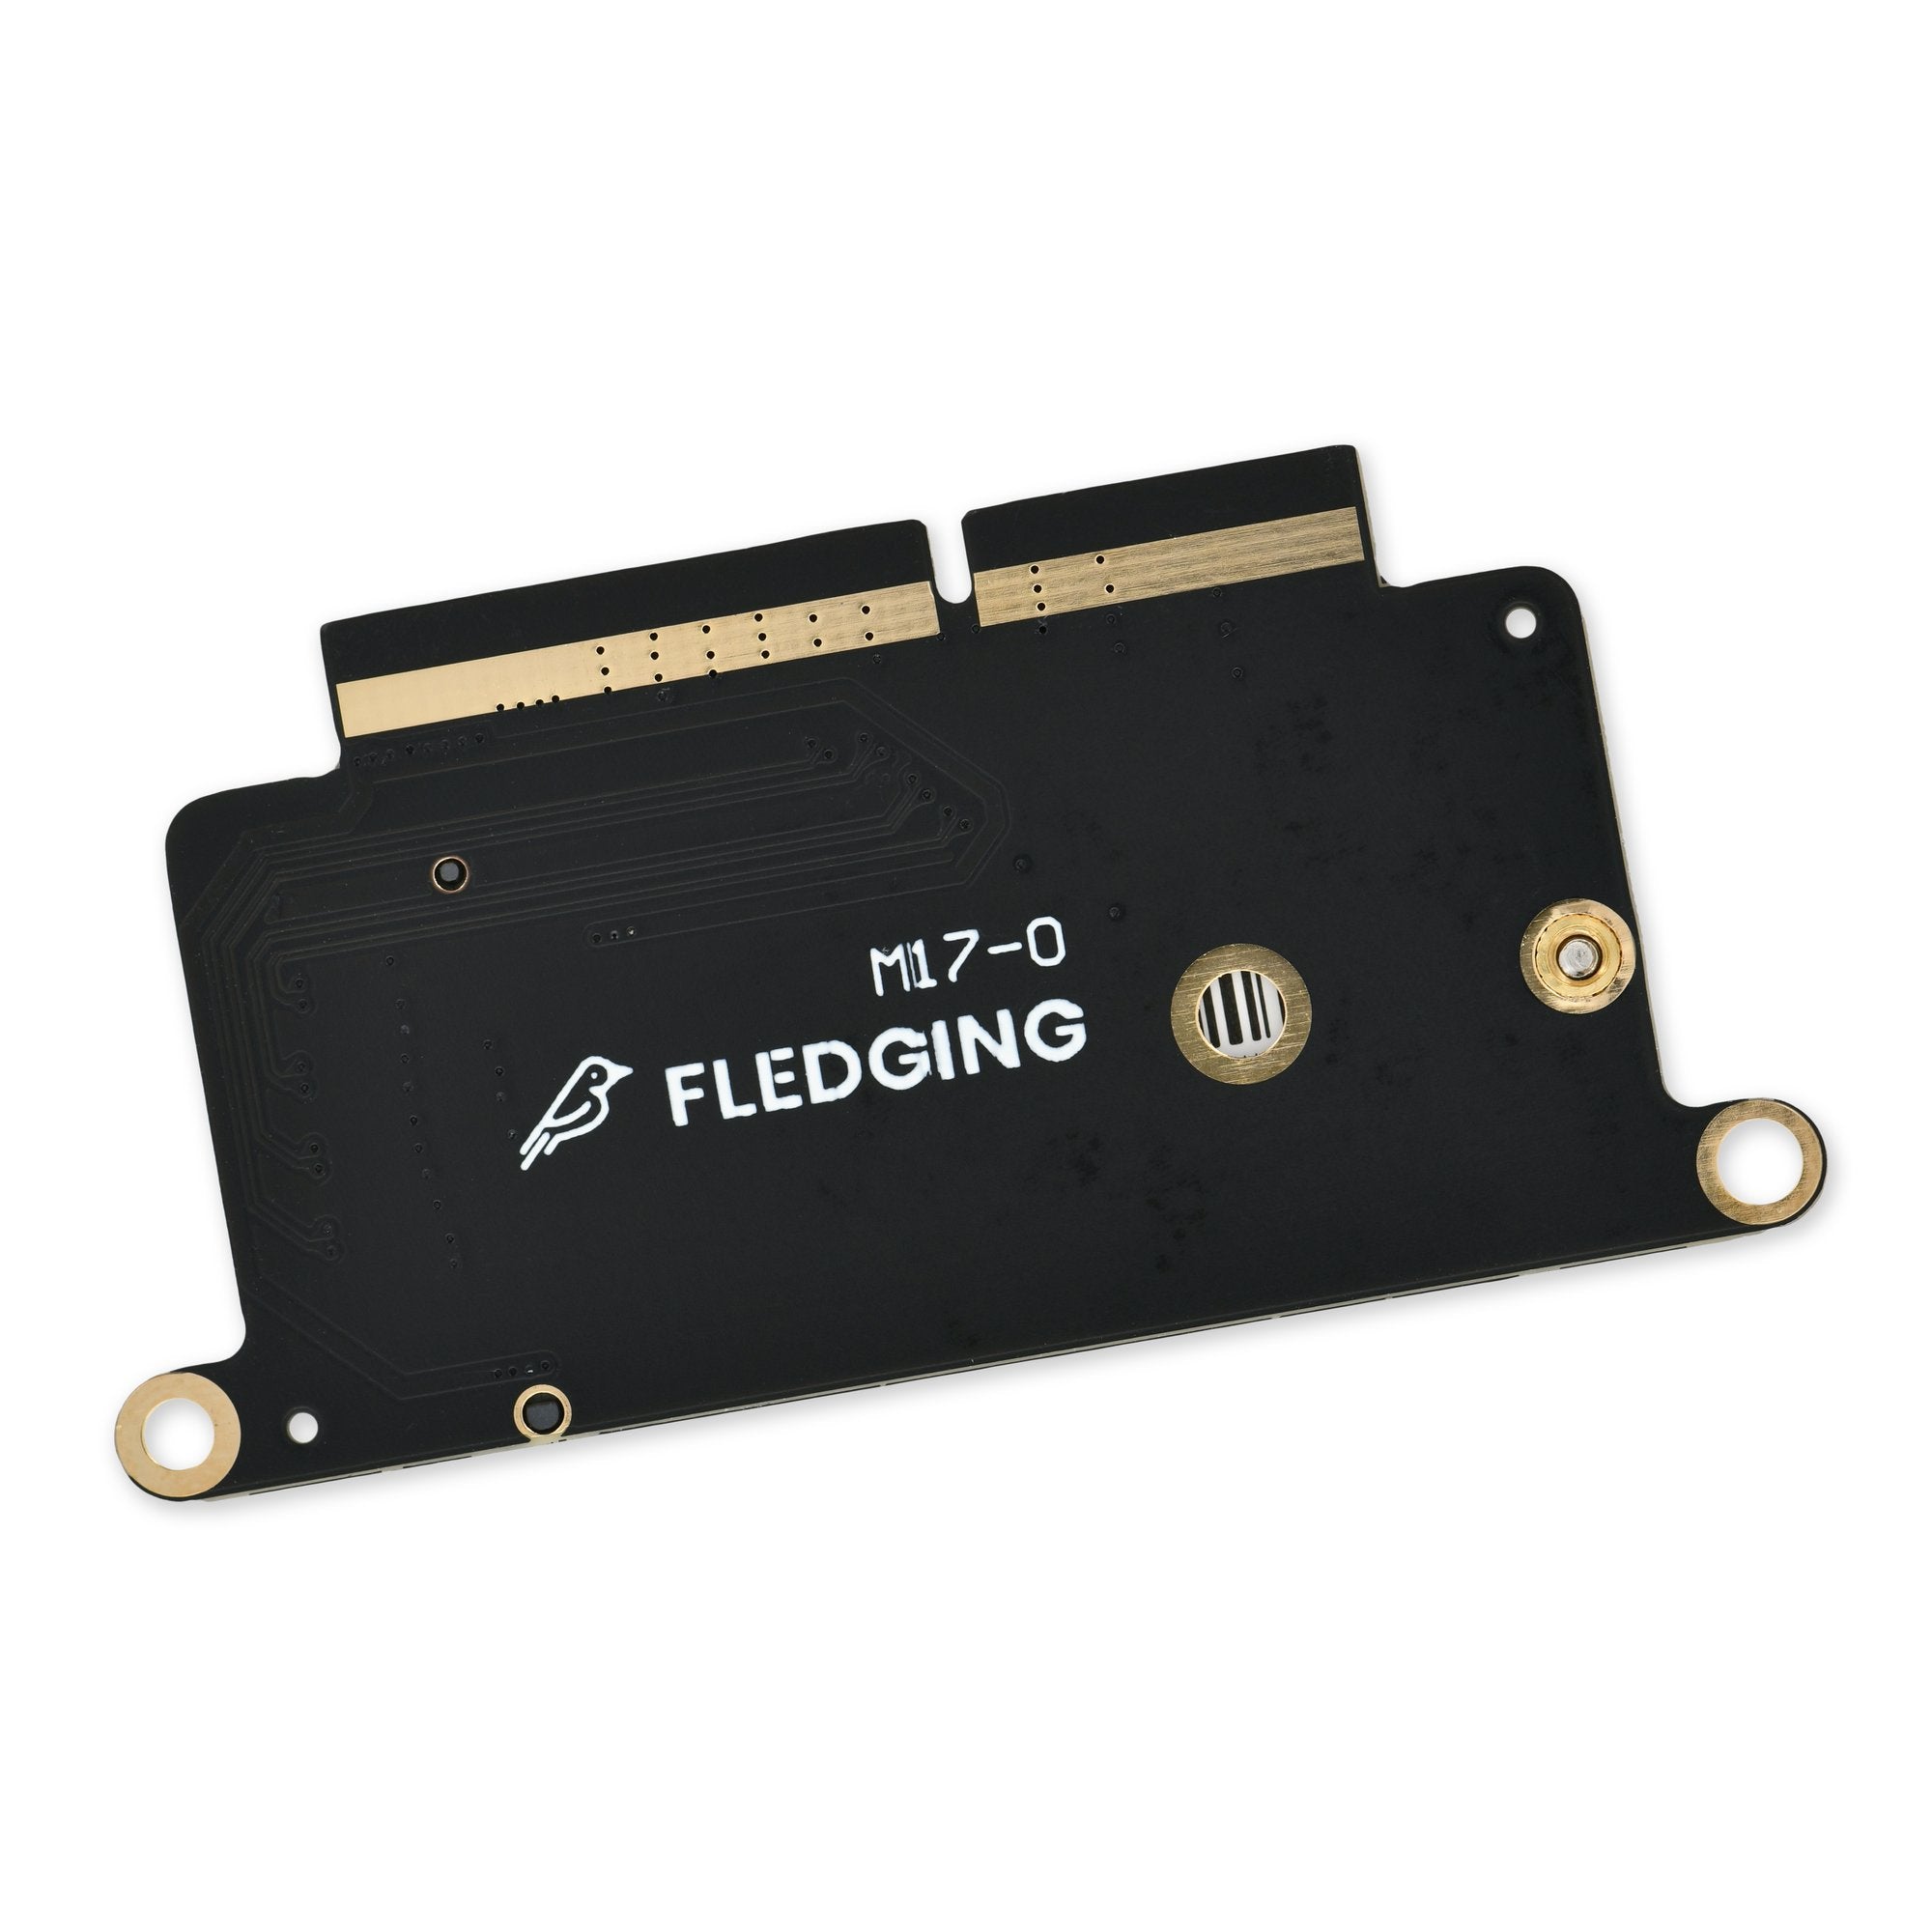 Fledging Feather M17 SSD 2 TB New